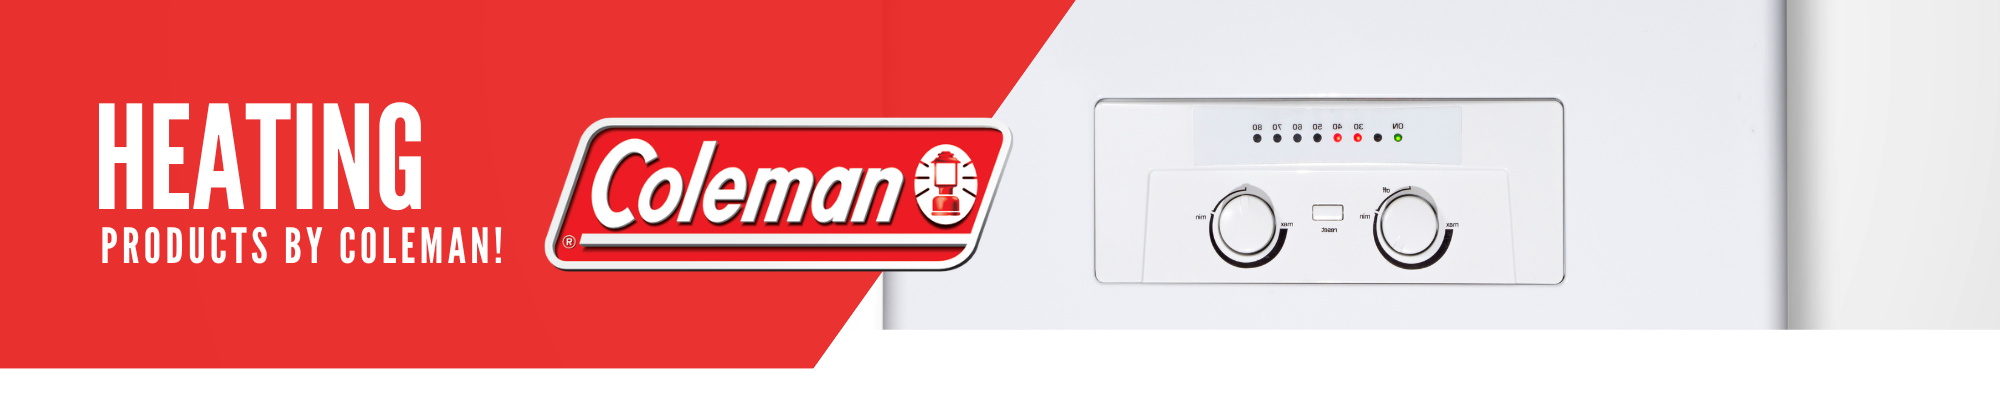 Coleman heating products